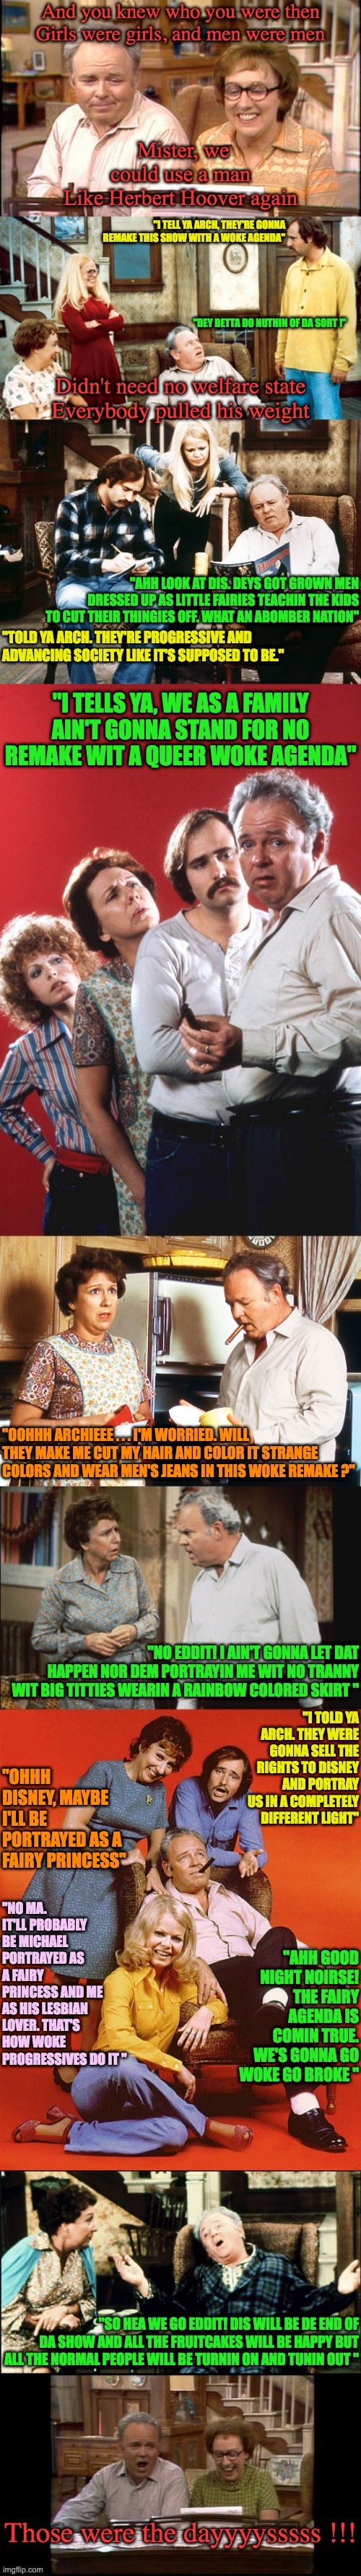 A Classic Show, A Classic Meme | image tagged in all in the family | made w/ Imgflip meme maker